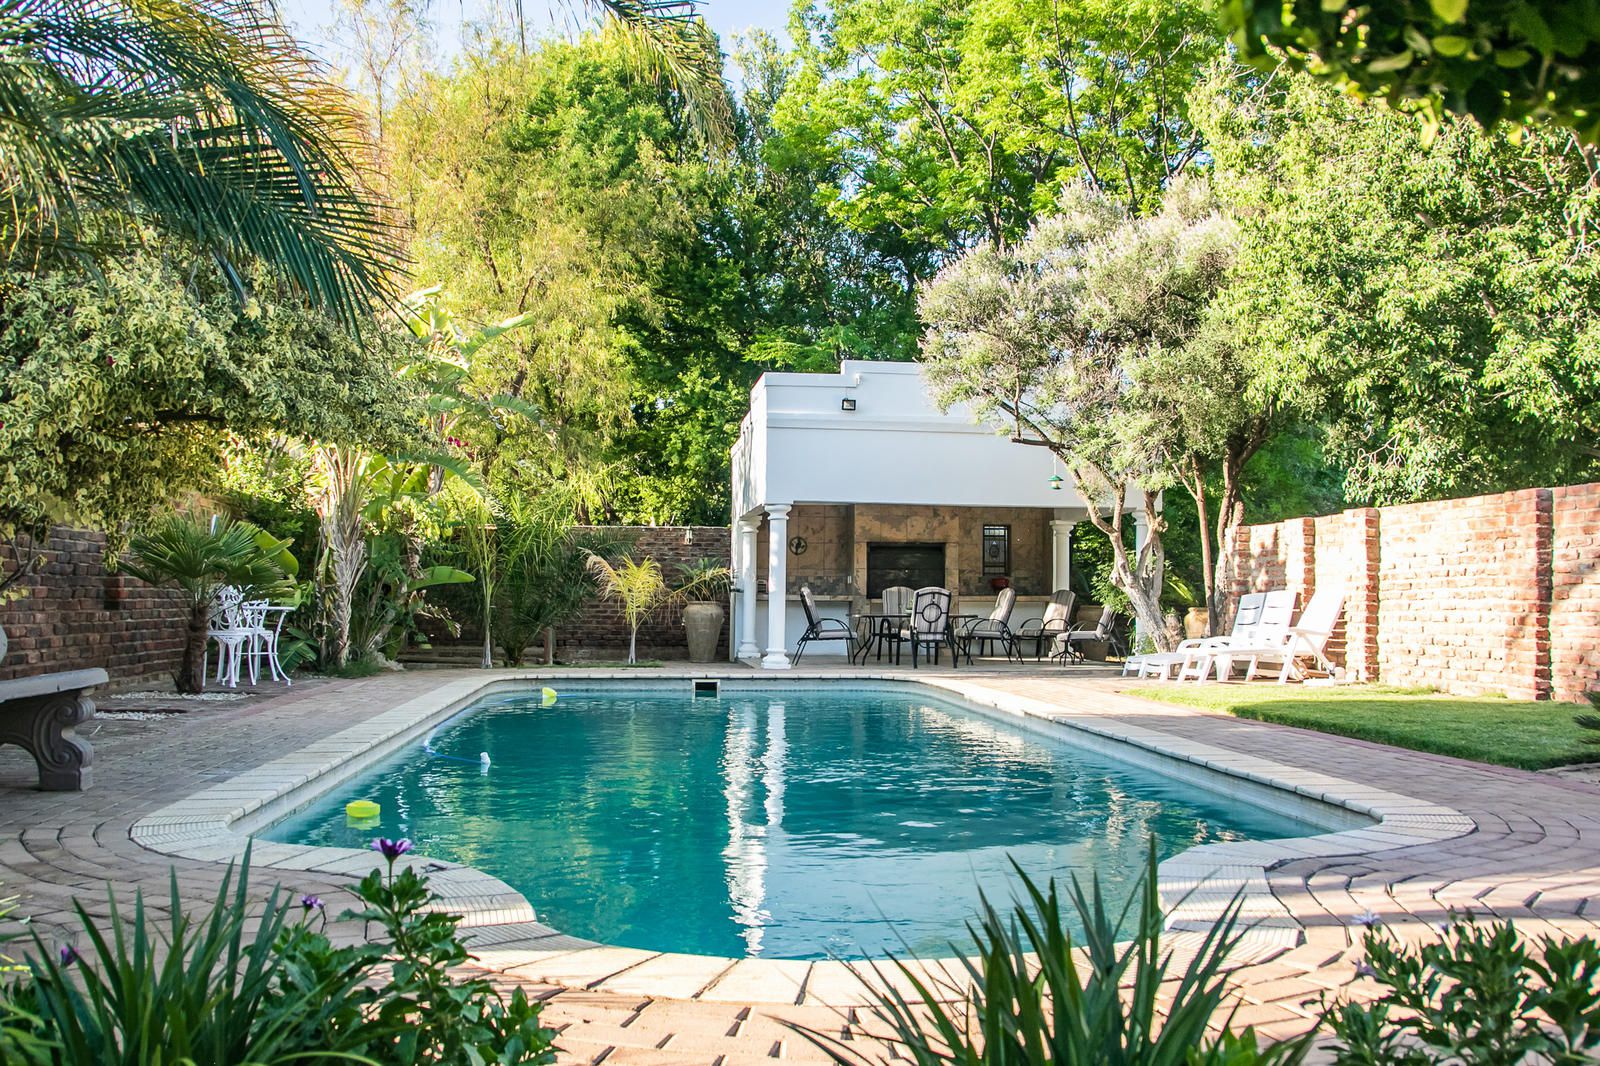 Middle Street Manor Bandb Graaff Reinet Eastern Cape South Africa Garden, Nature, Plant, Swimming Pool